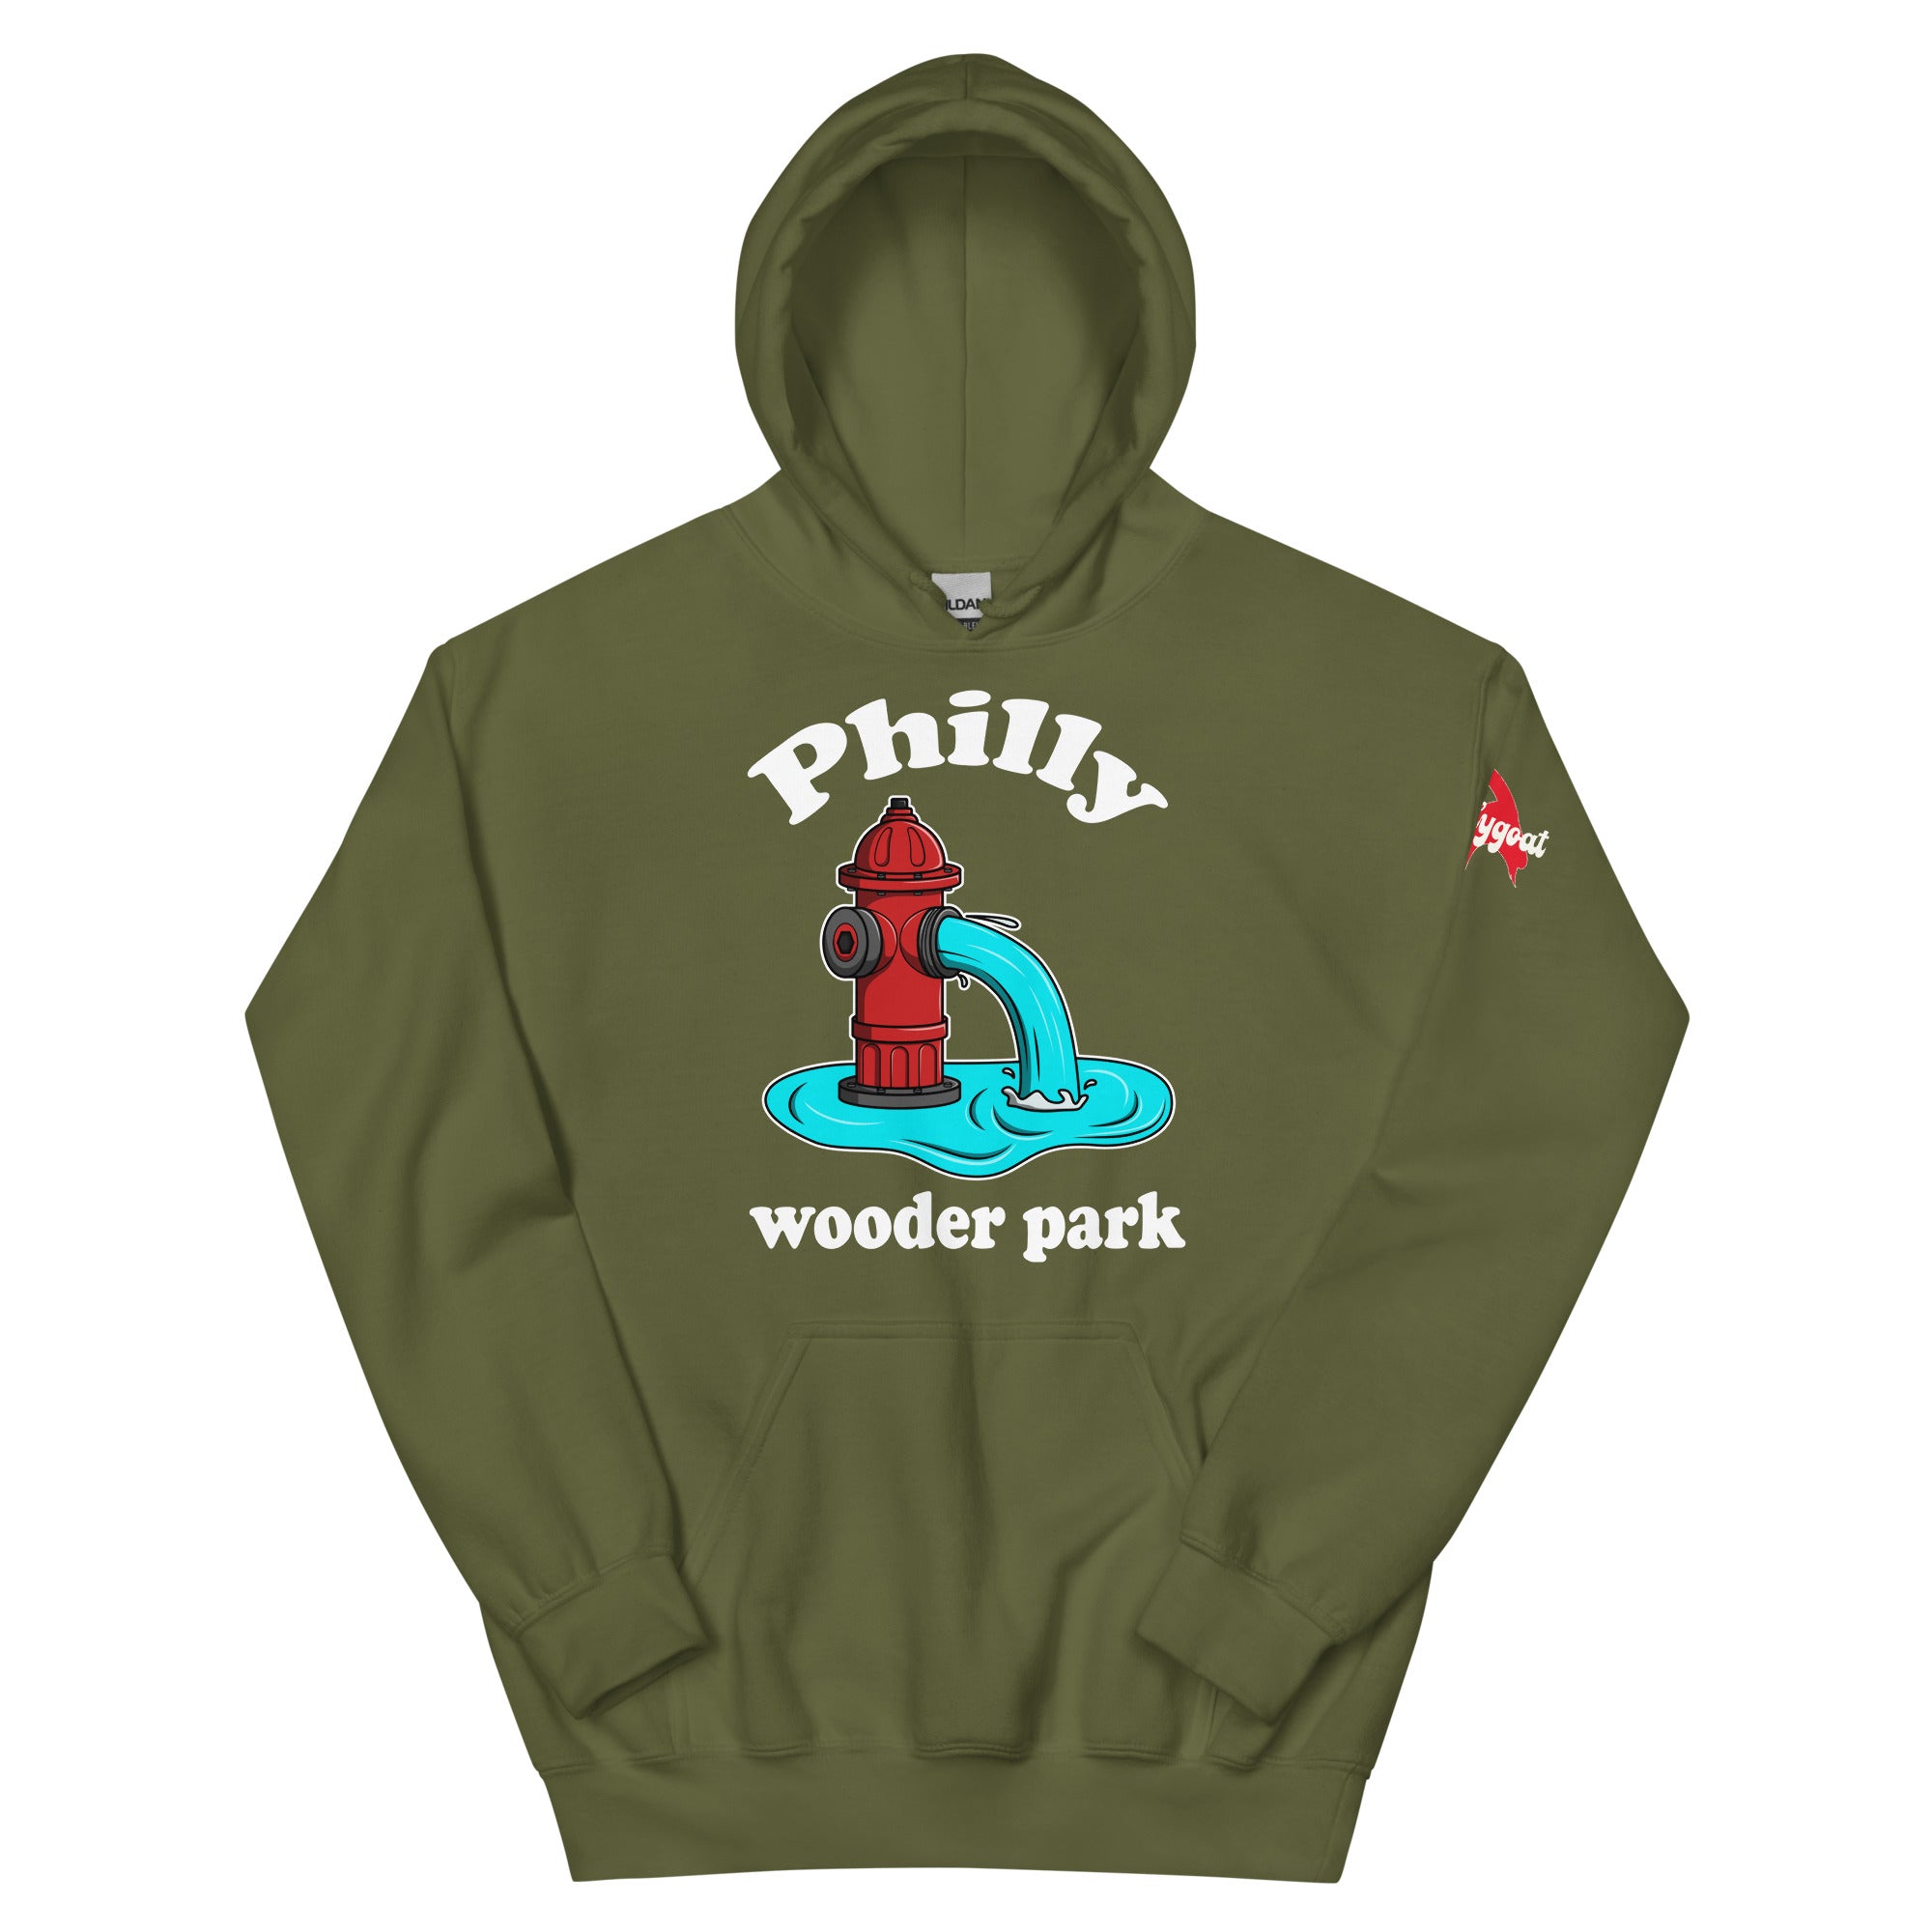 Philadelphia Philly wooder park water park fire hydrant funny army green hoodie from Phillygoat